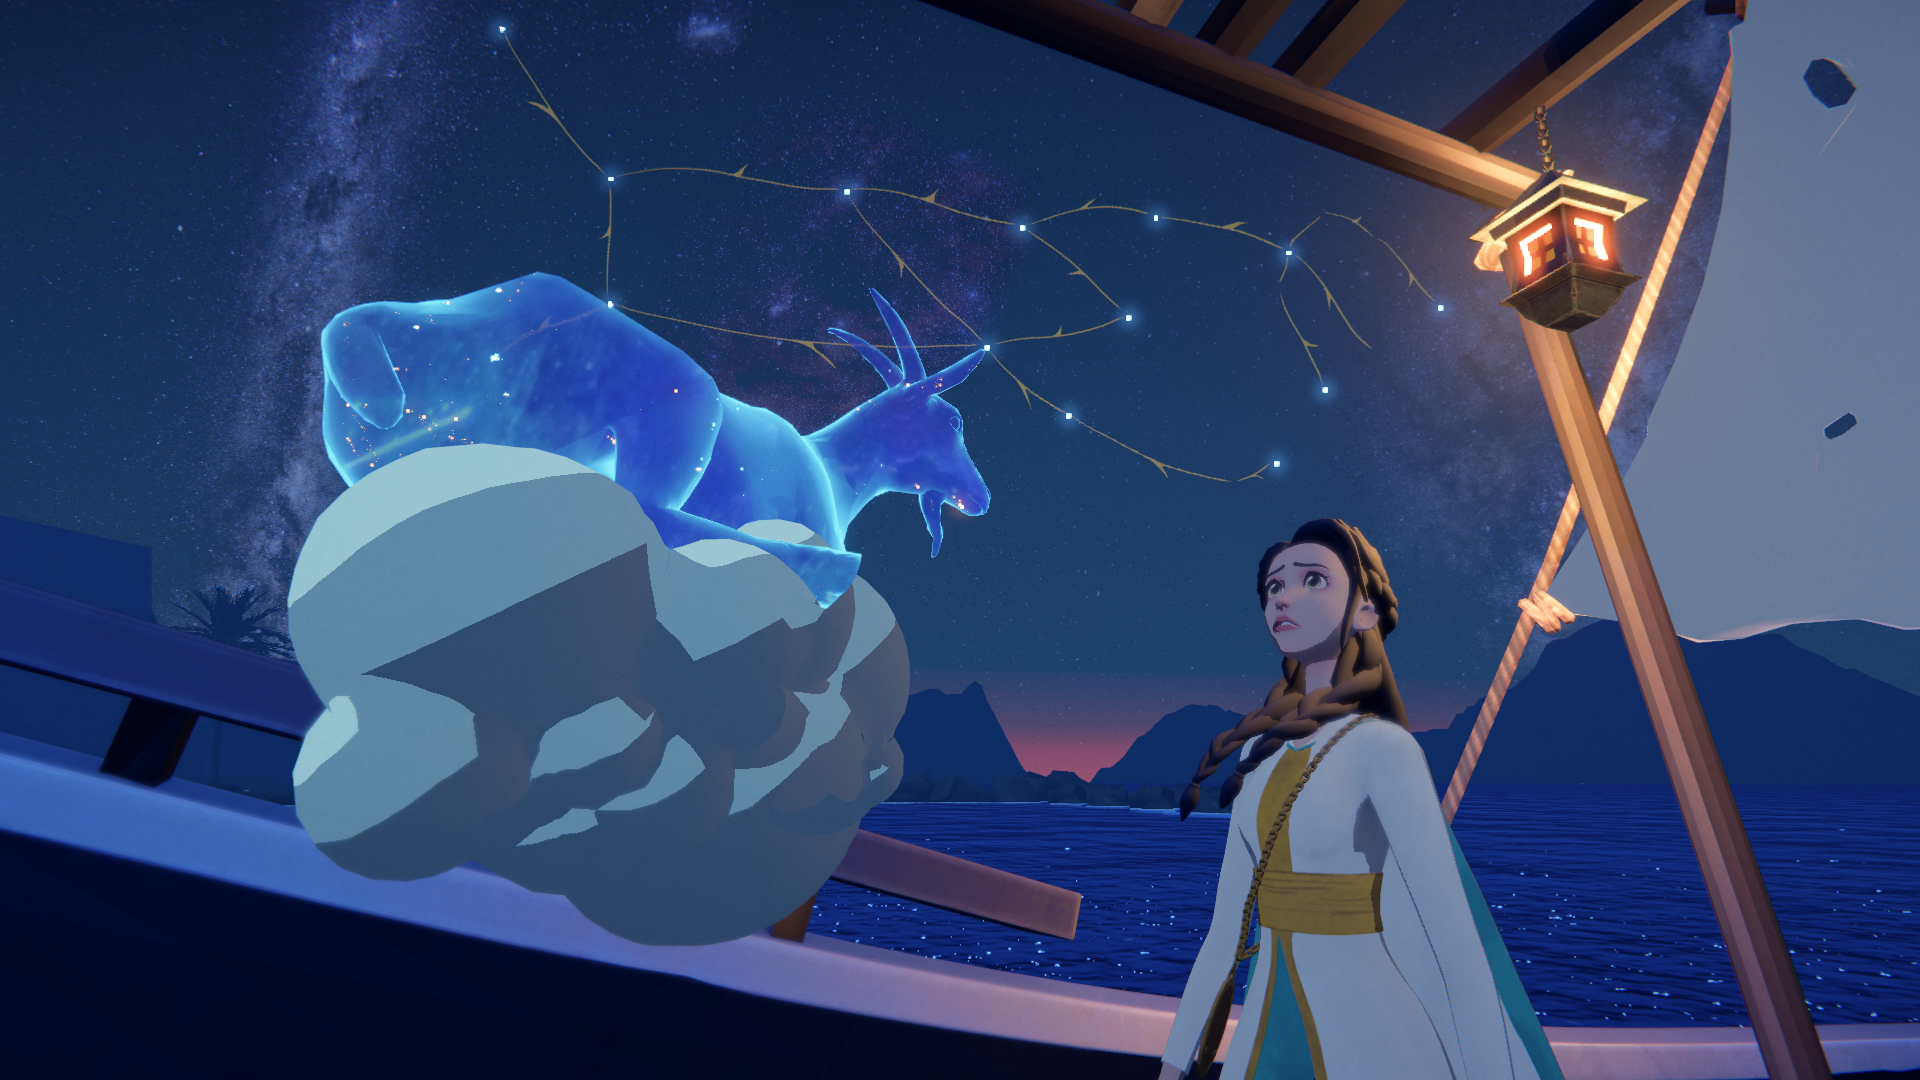 A screenshot from Nightscape. A woman with brown hair arranged in to braids is on the right, looking at what appears to be a blue celestial-type goat floating on a cloud. The background is a dark blue sky, showing off a constellation.